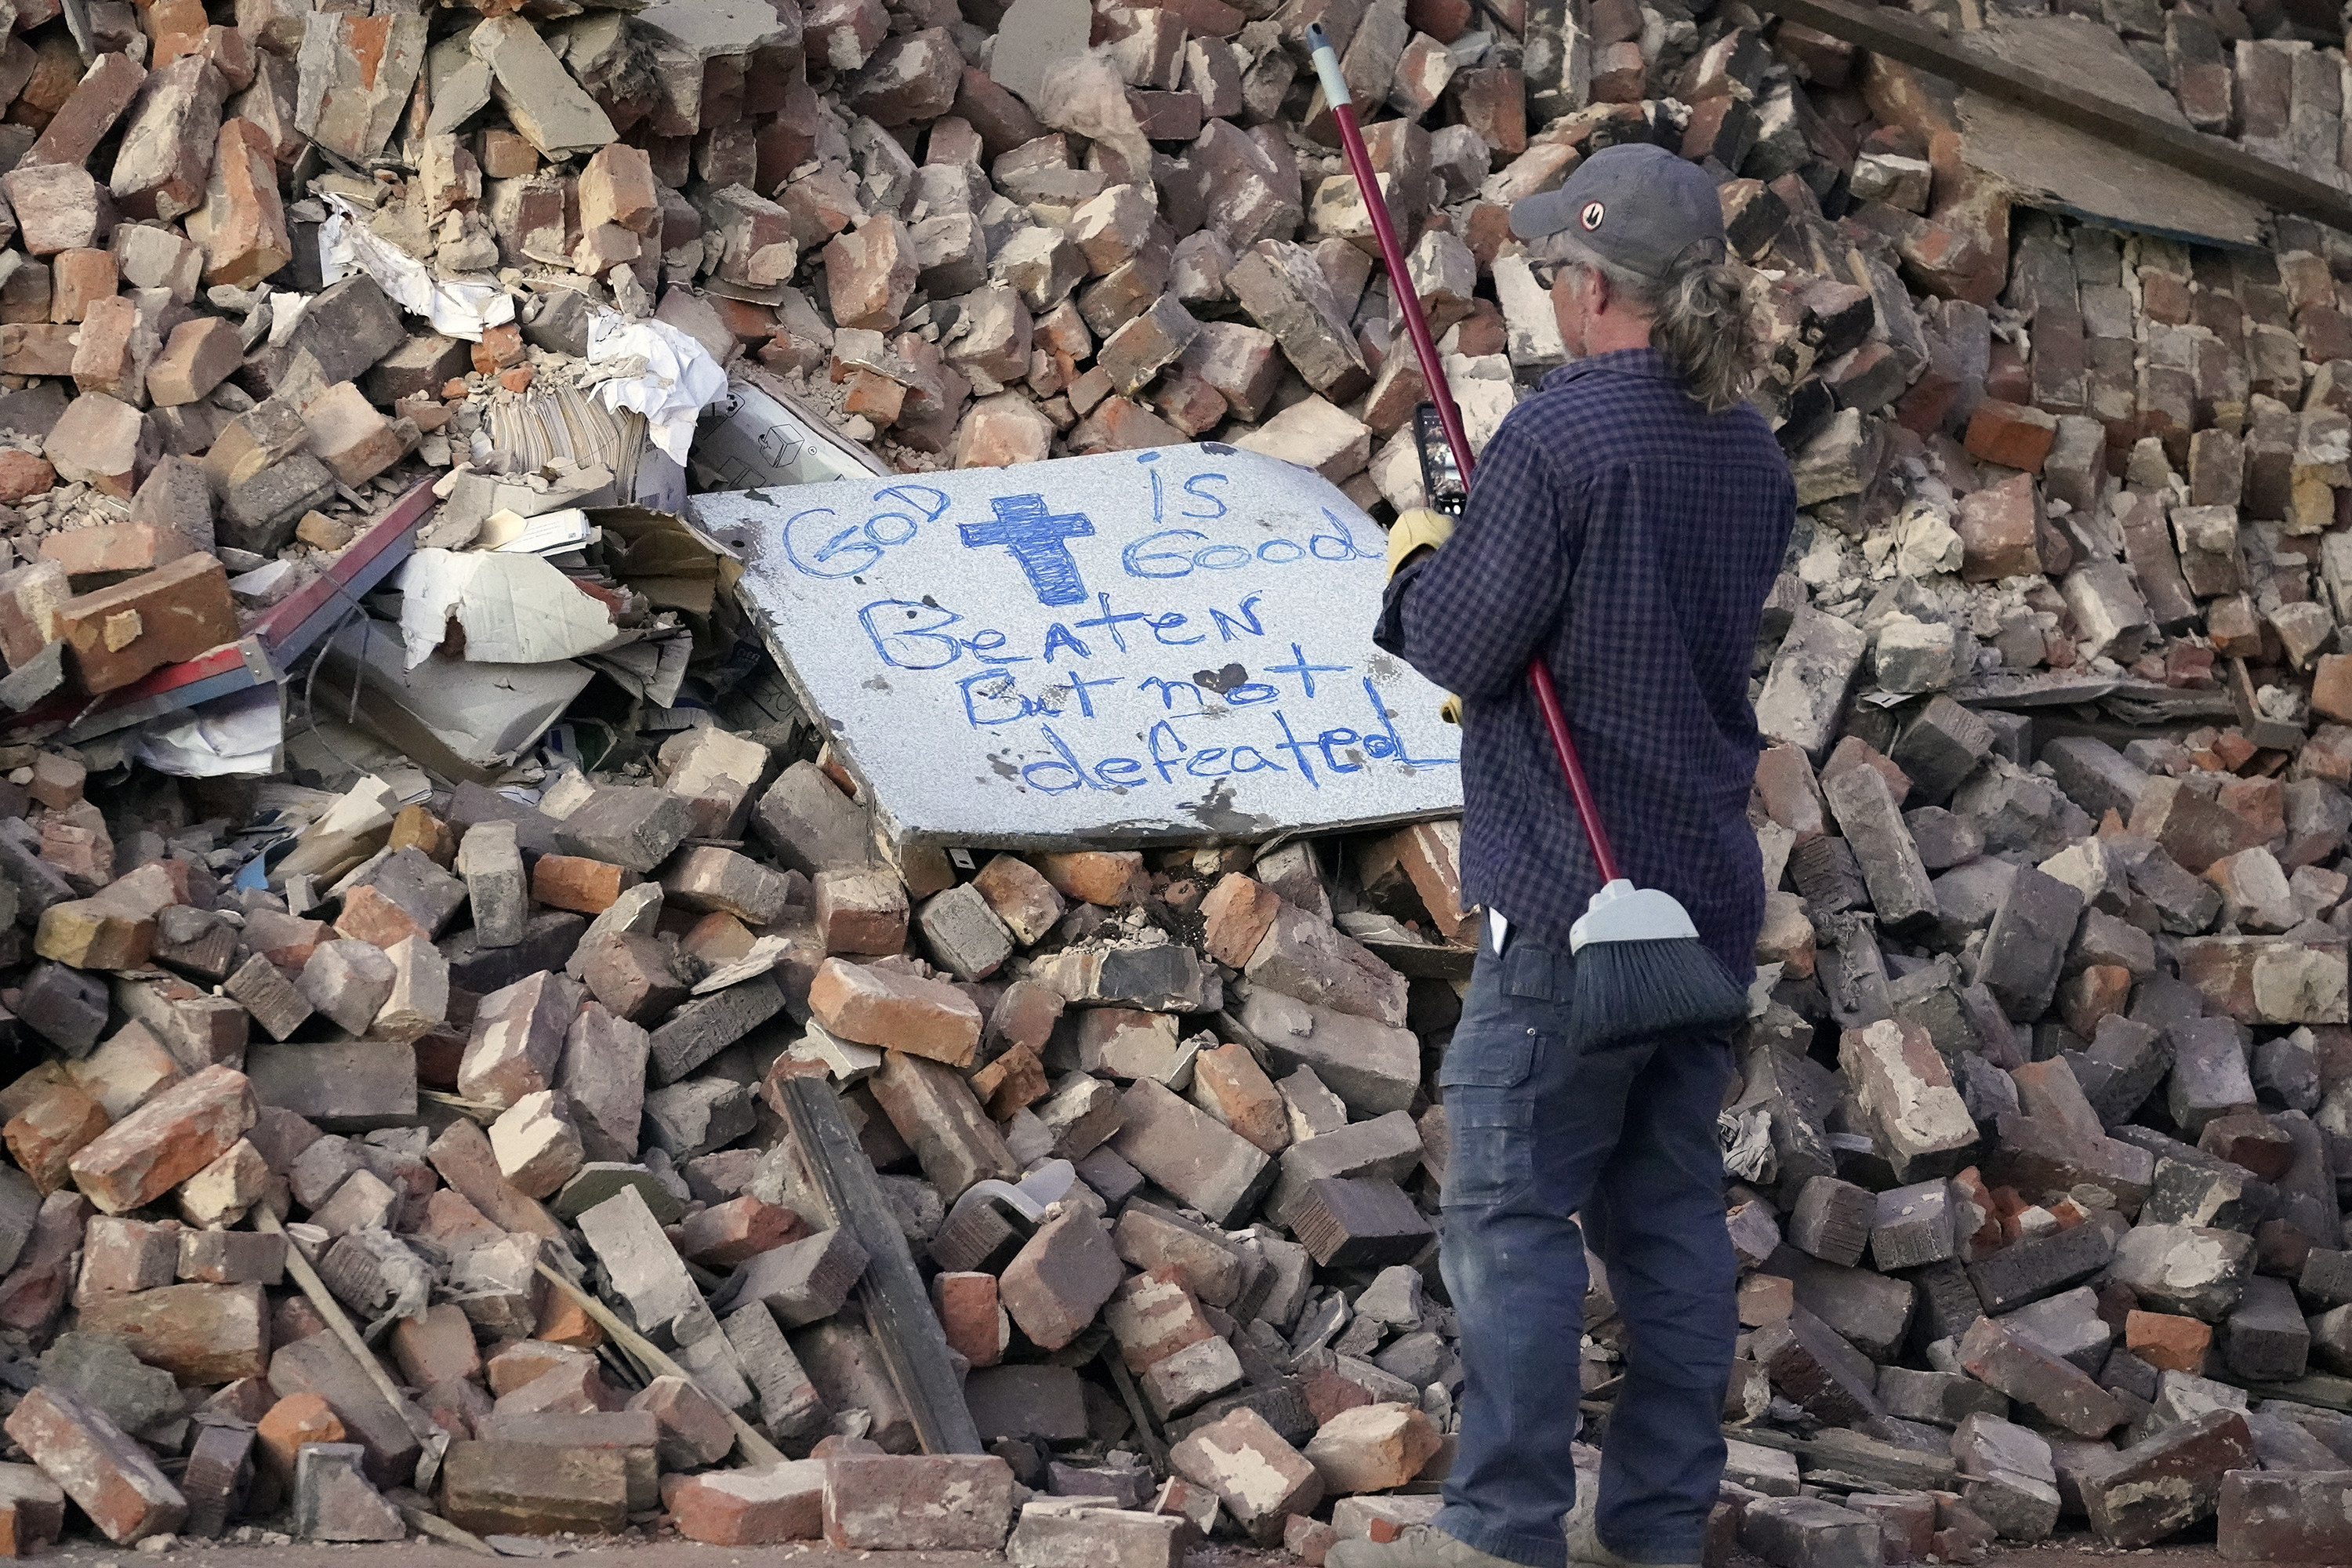 A man with a broom takes a photo on a pile of bricks that says that god is good beaten but not defeated